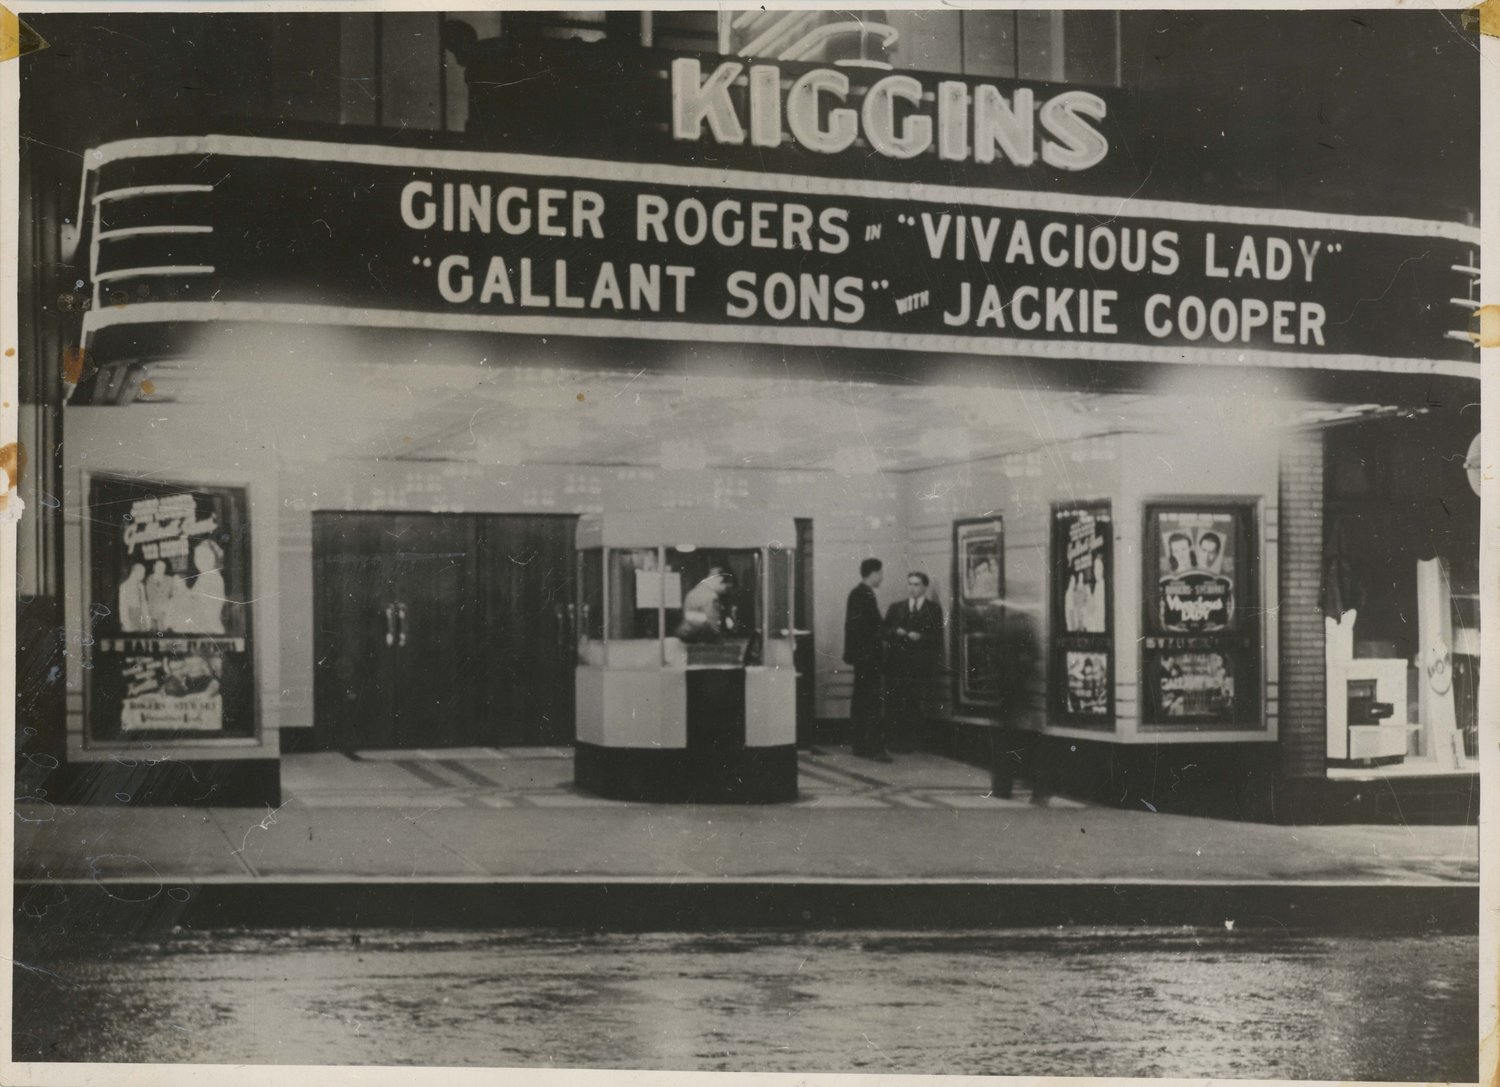 The Kiggins Theatre marquee in 1941.